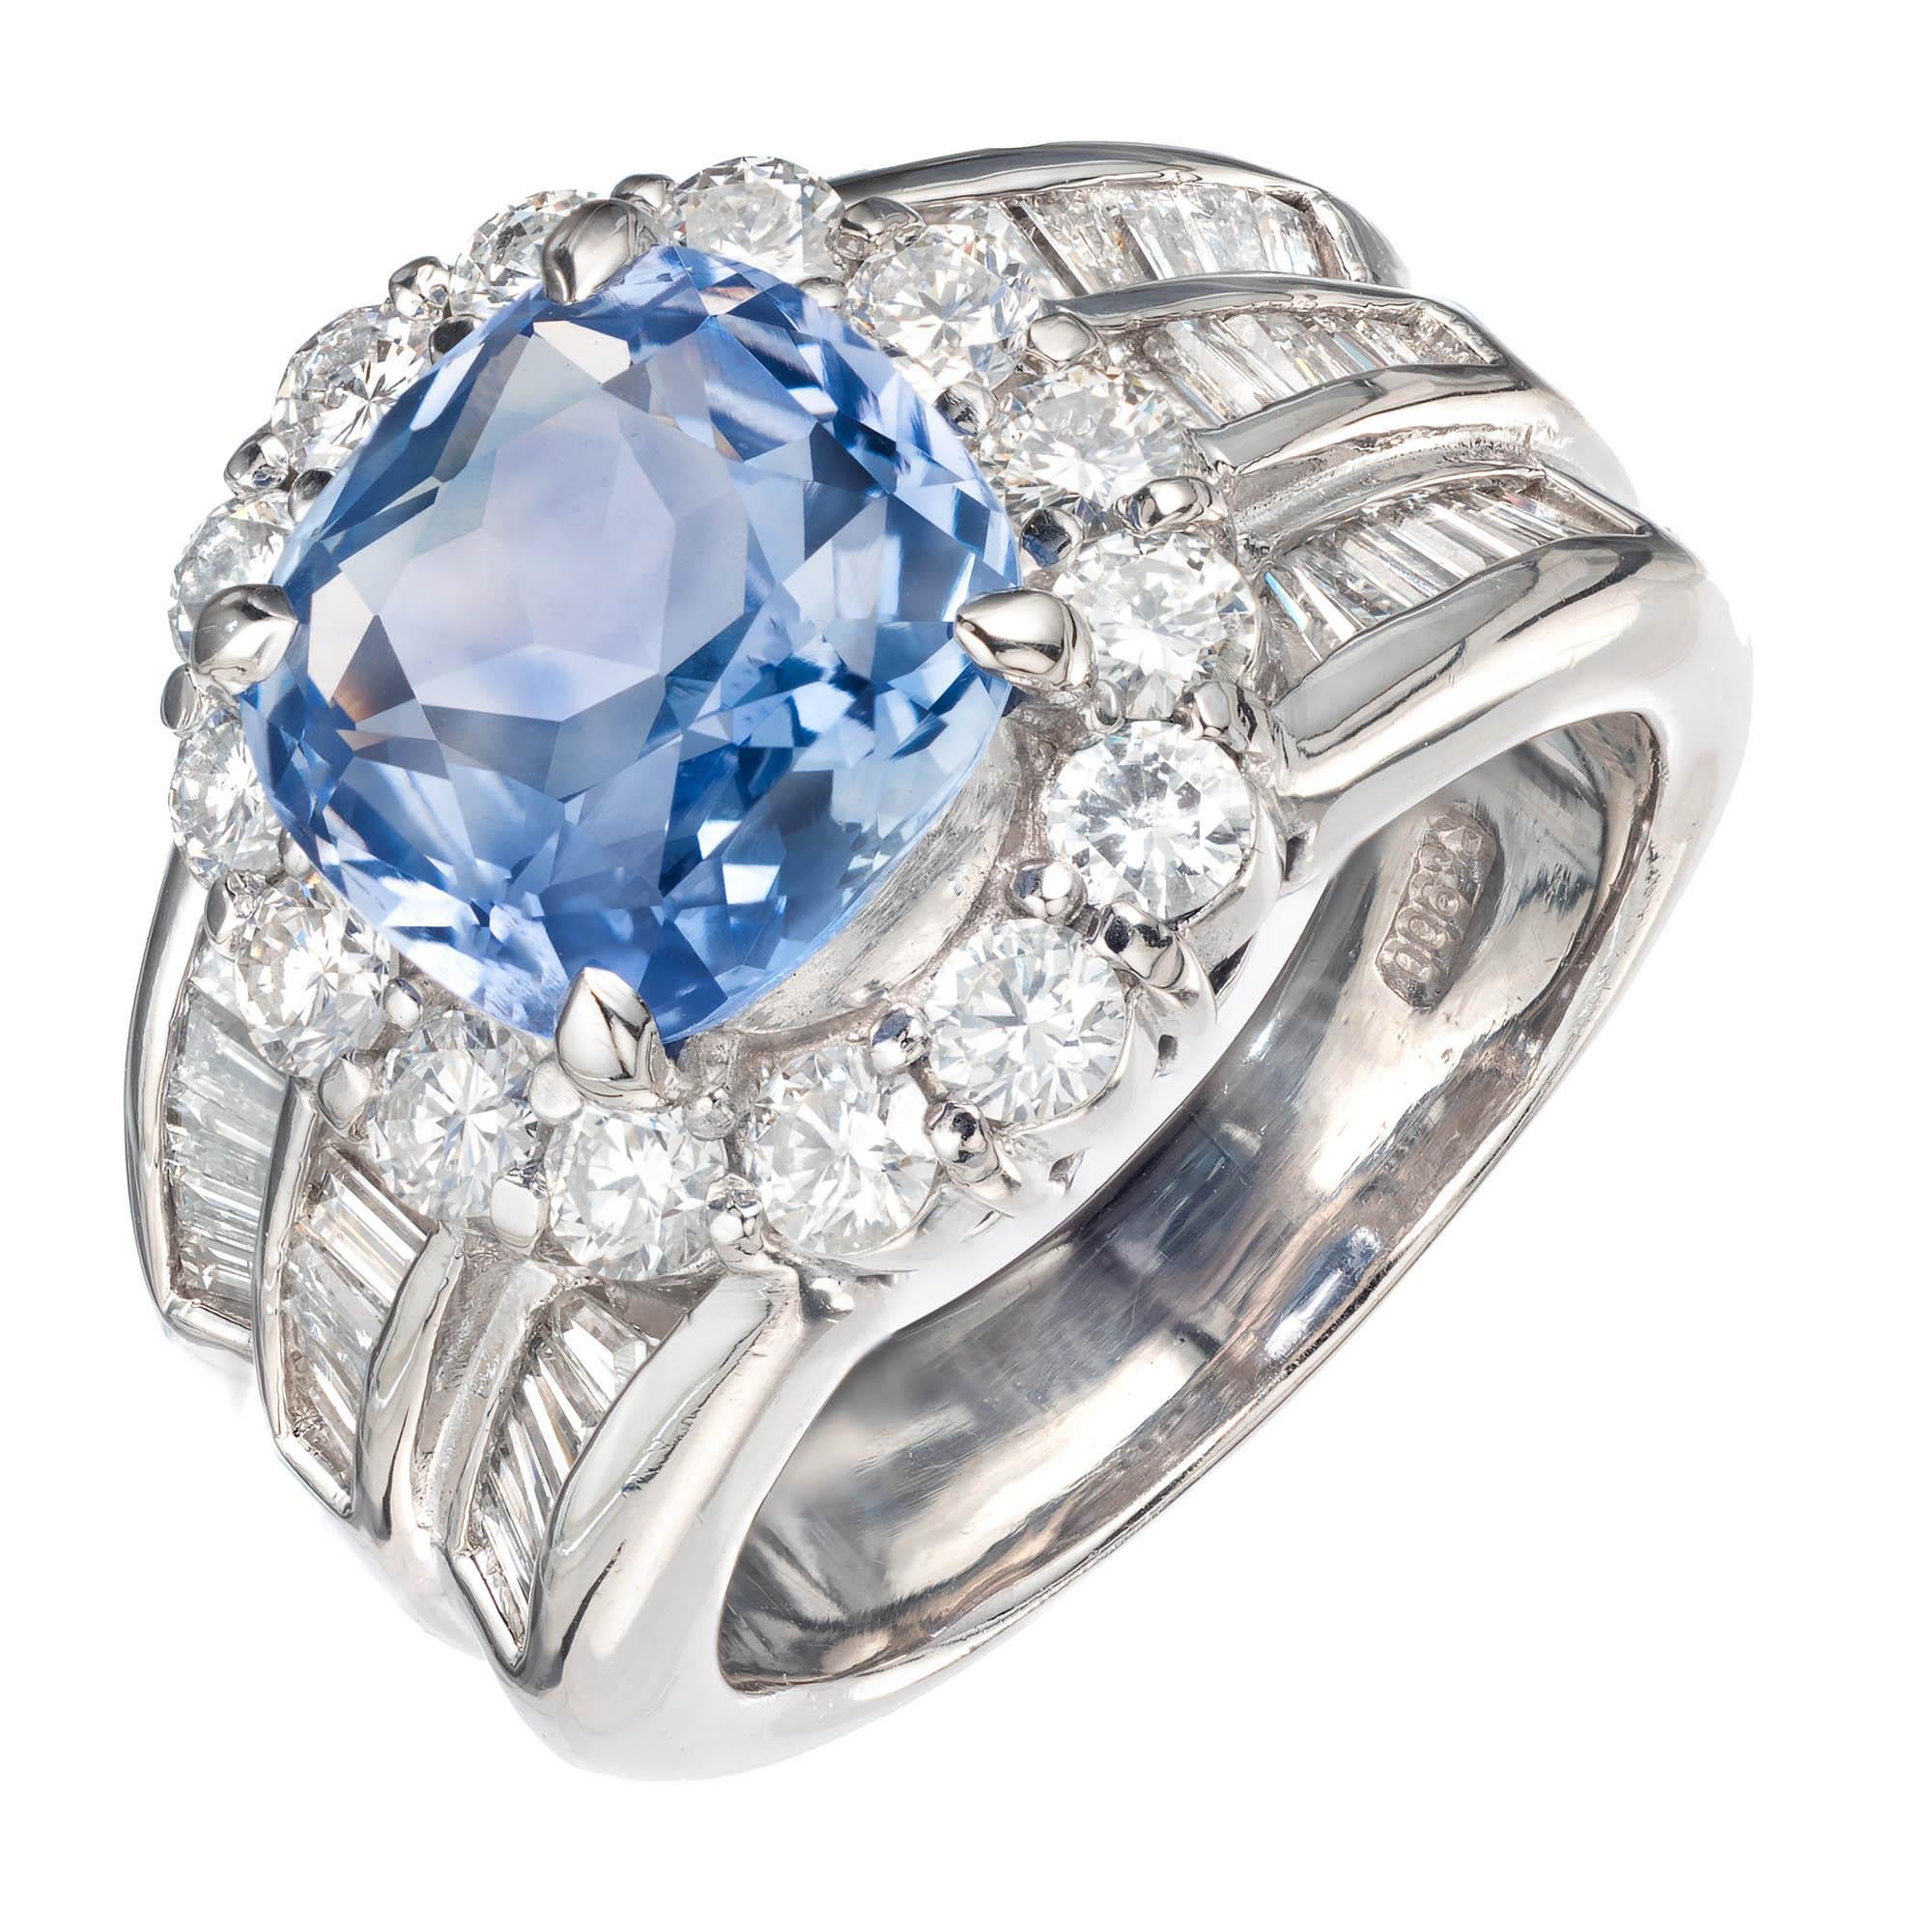 Sapphire and diamond engagement ring. Cushion cut natural untreated light blue periwinkle sapphire set in a diamond halo platinum setting with baguette accent side diamonds. GIA certifed. Made in the Peter Suchy  Workshop. 

1 cushion brilliant cut